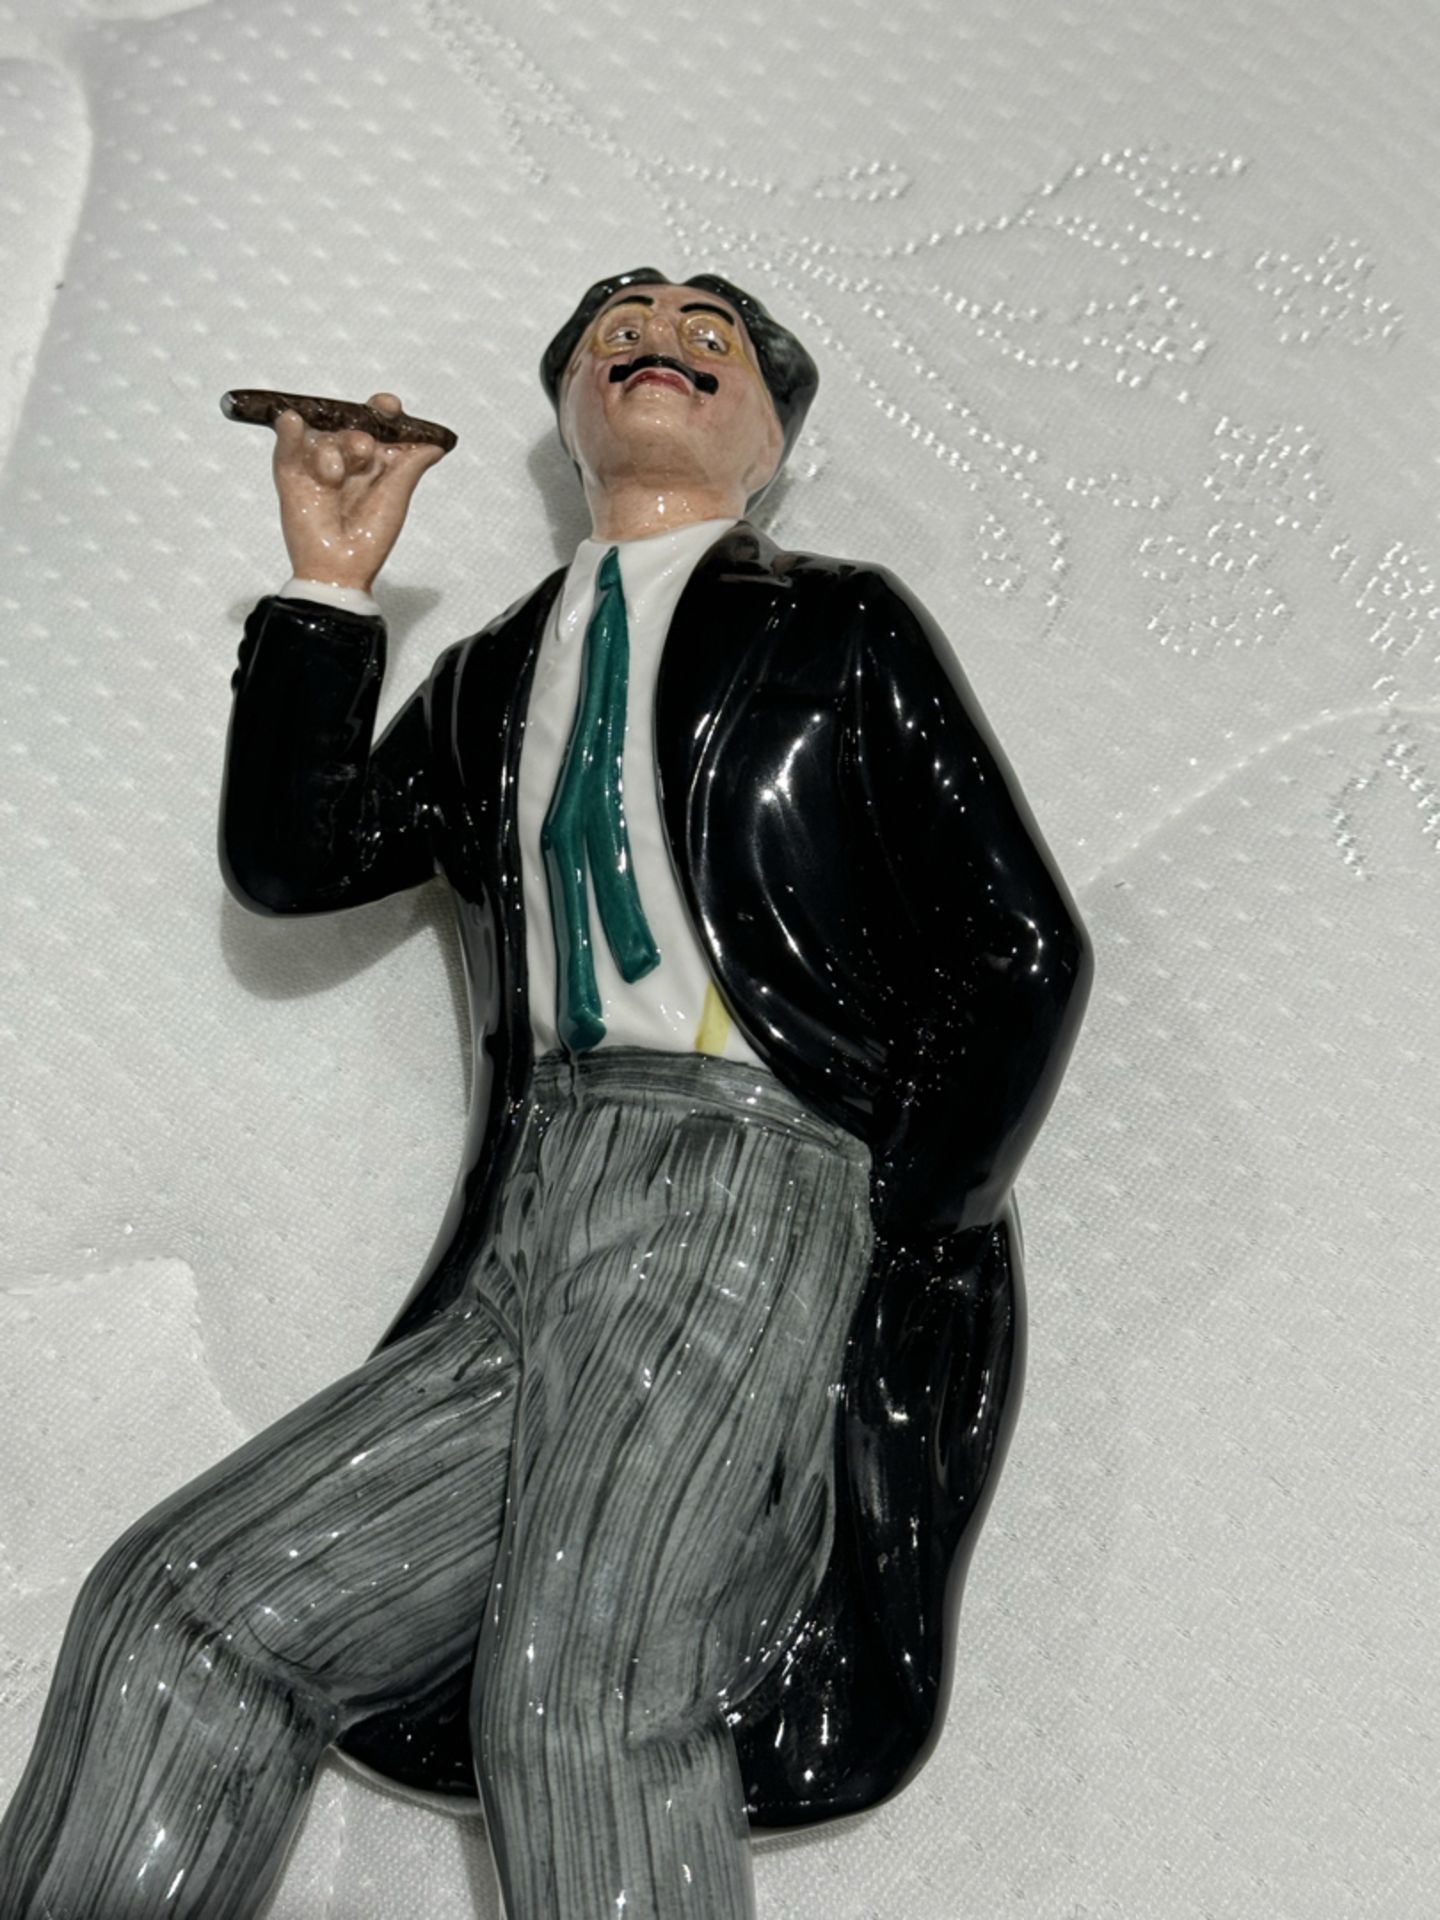 Limited Edition Royal Doulton 'Groucho Marx' - HN 2777 - Ltd Edition of 9500 - Fine China - Image 2 of 3